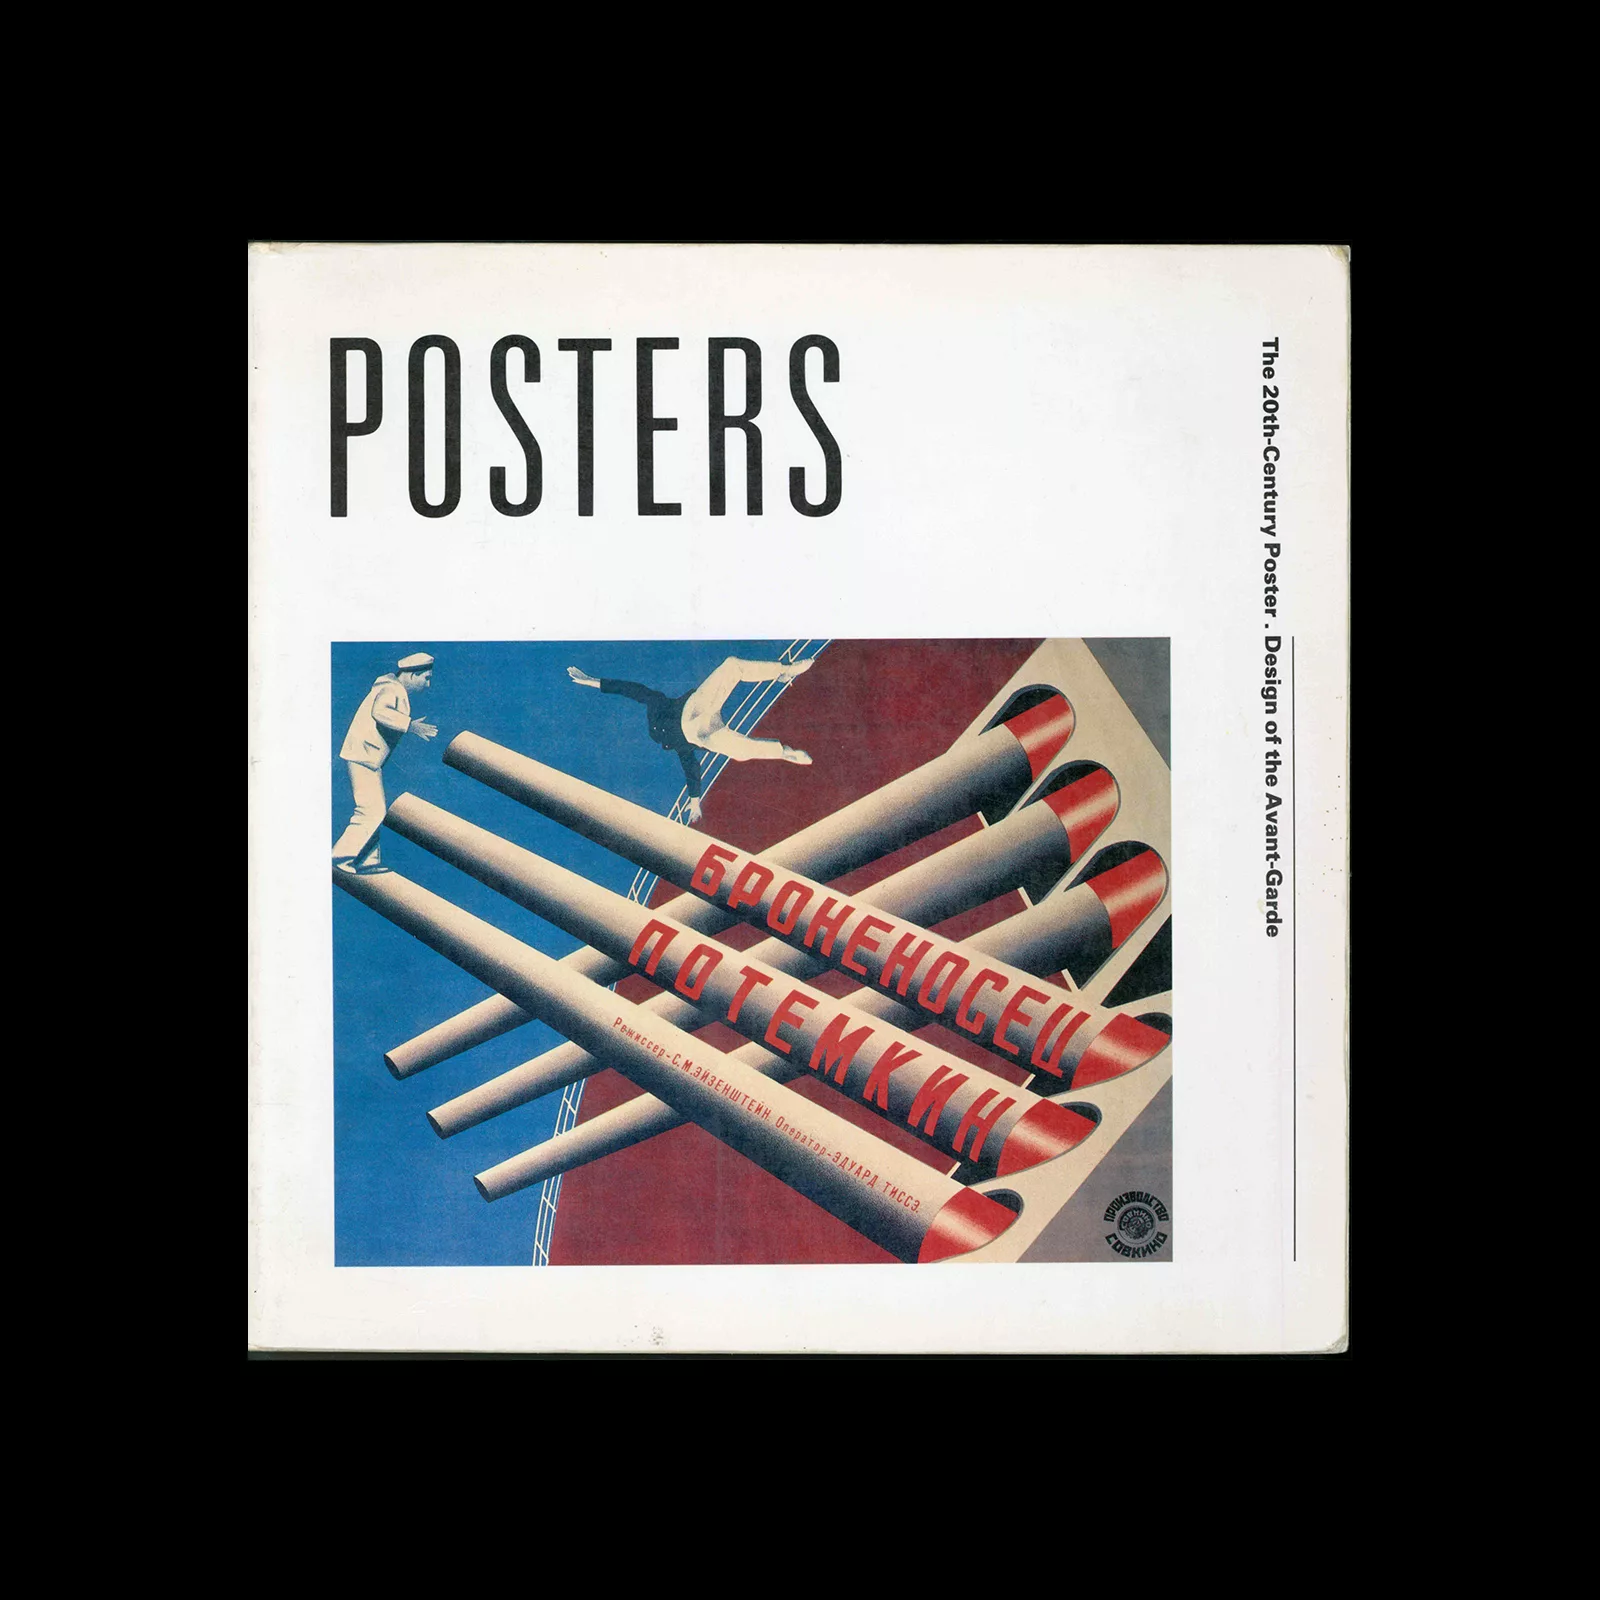 Posters, The 20th-Century Poster - Design of the Avant-Garde, Abbeville Press, 1984